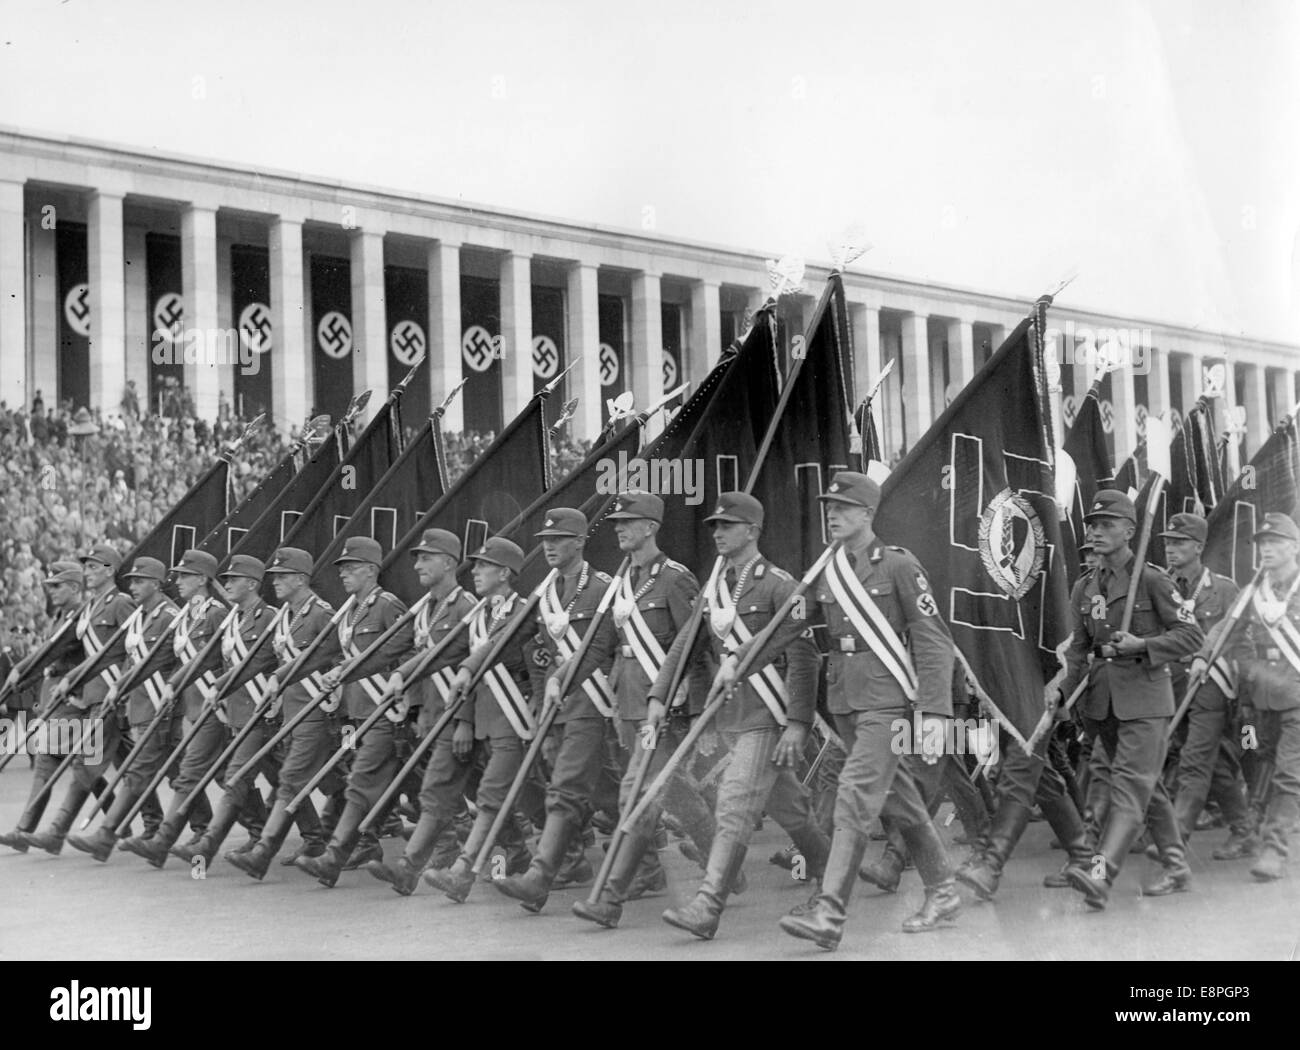 Nuremberg Rally 1936 in Nuremberg, Germany - Members of the Reich Labour Service (RAD) carry flags as they march past the grandstand on Zeppelin Field at the Nazi party rally grounds. Flaws in quality due to the historic picture copy) Fotoarchiv für Zeitgeschichtee - NO WIRE SERVICE – Stock Photo